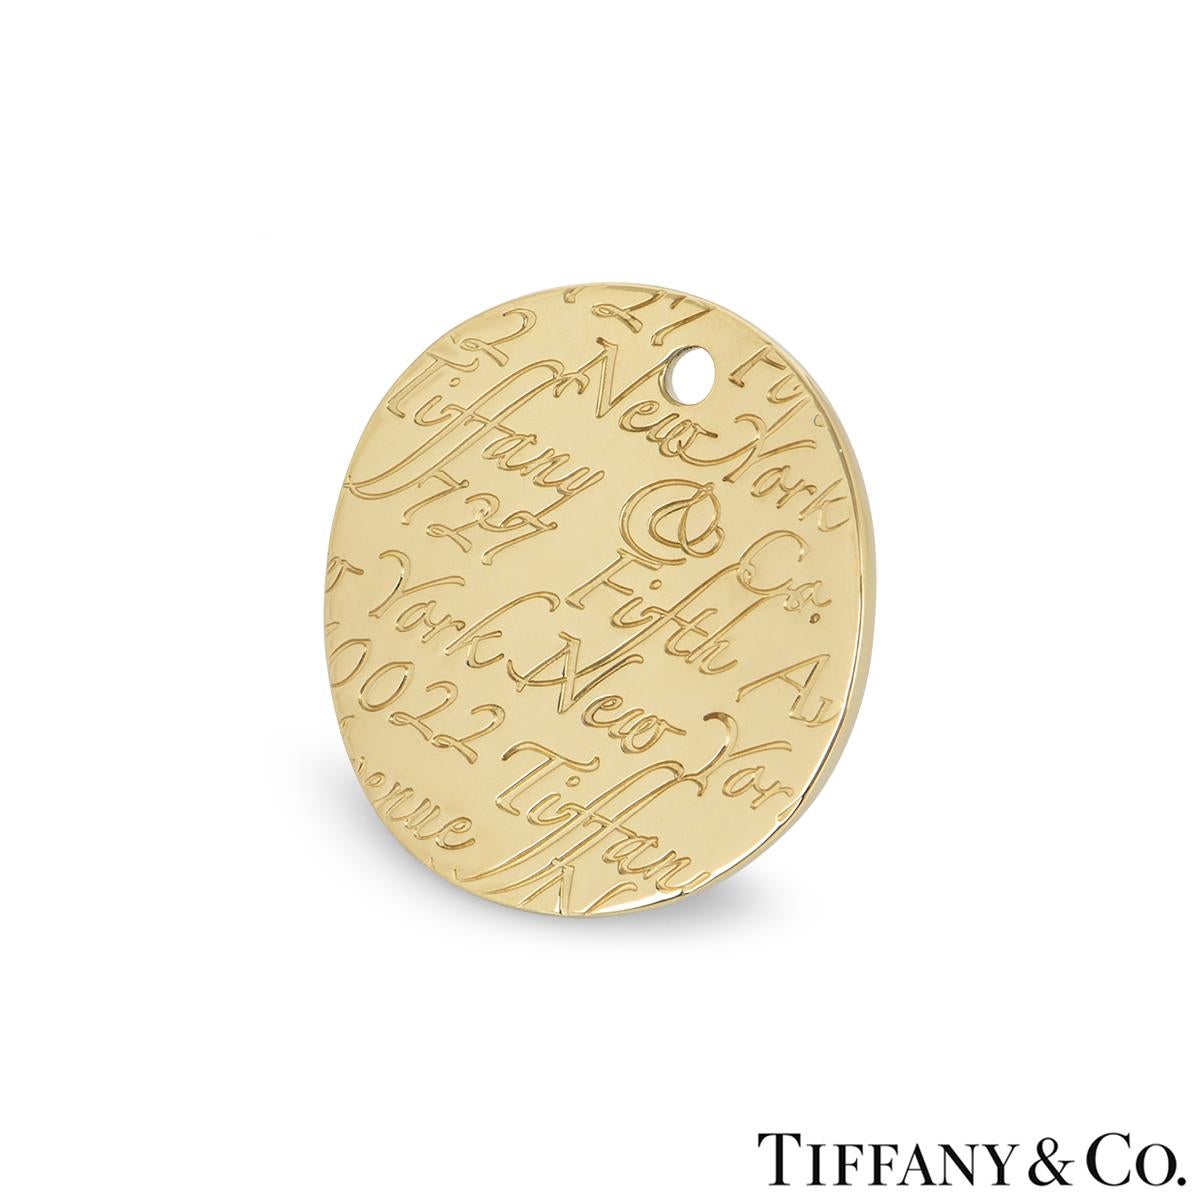 An 18k yellow gold pendant by Tiffany & Co. from the Notes collection. The circular ripple design pendant is engraved with an elegant script that reads Tiffany & Co 727 Fifth Avenue 10022. The pendant measures 2.4cm and has a gross weight of 9.23